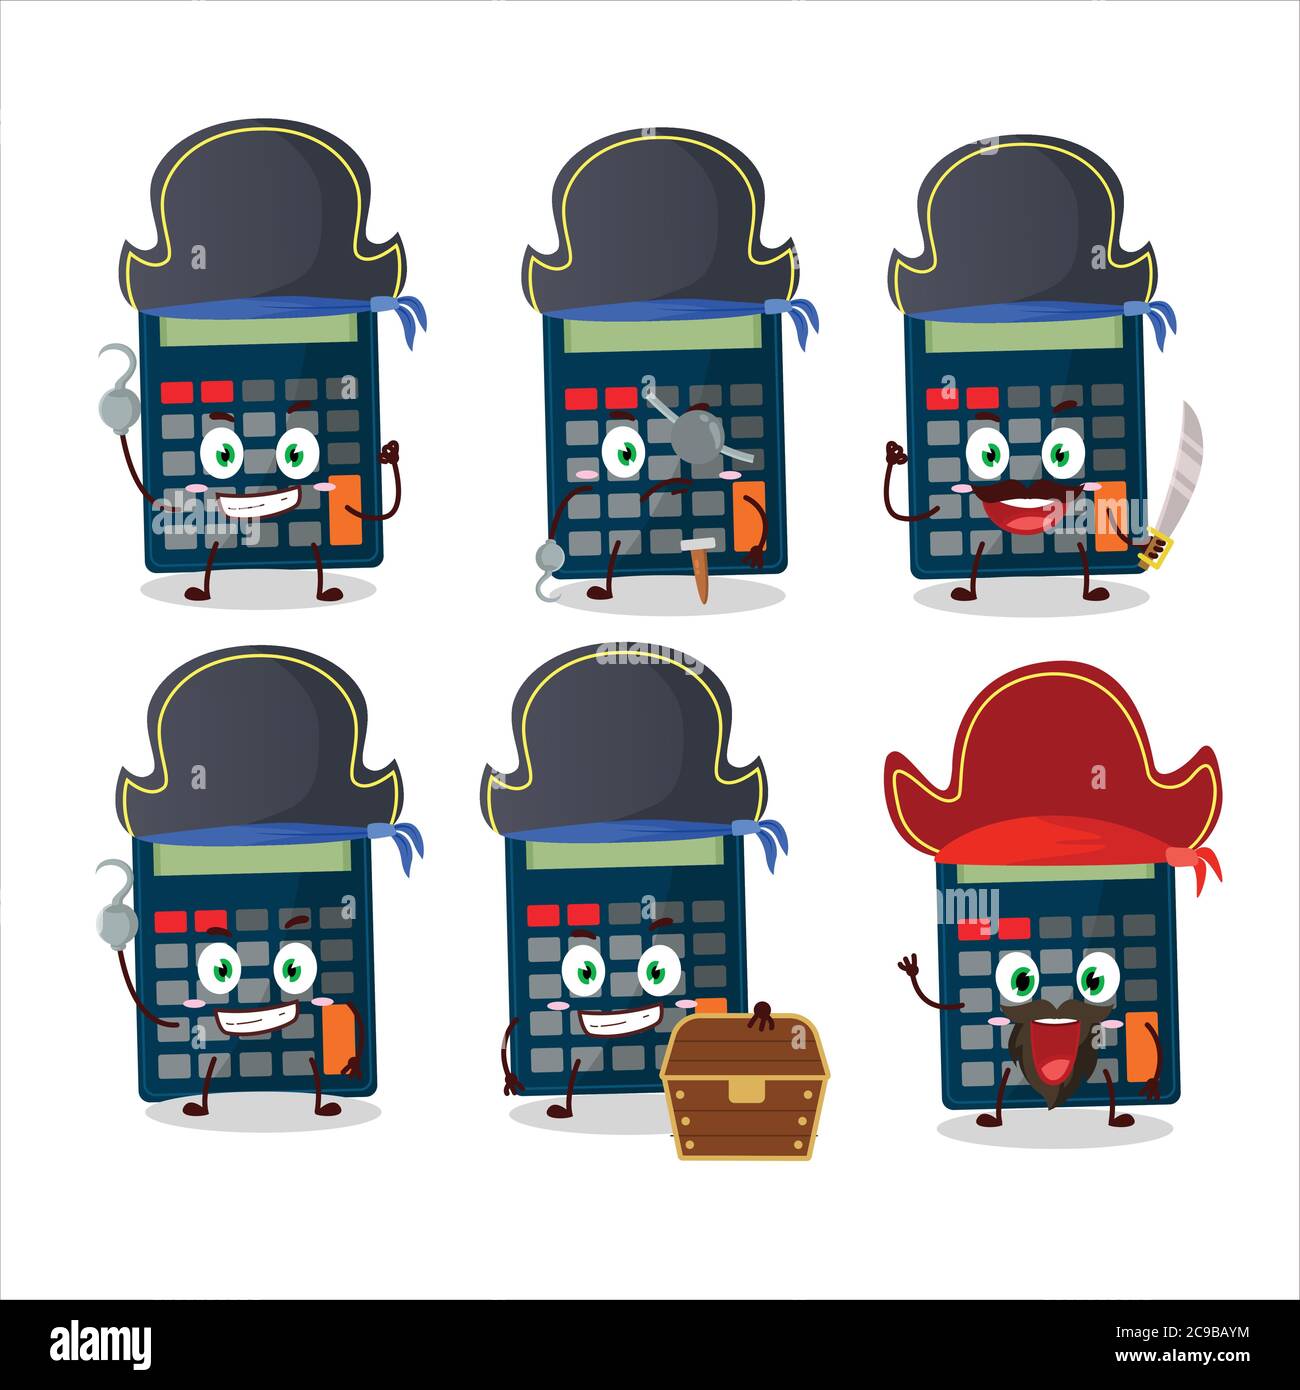 Cartoon character of calculator with various pirates emoticons